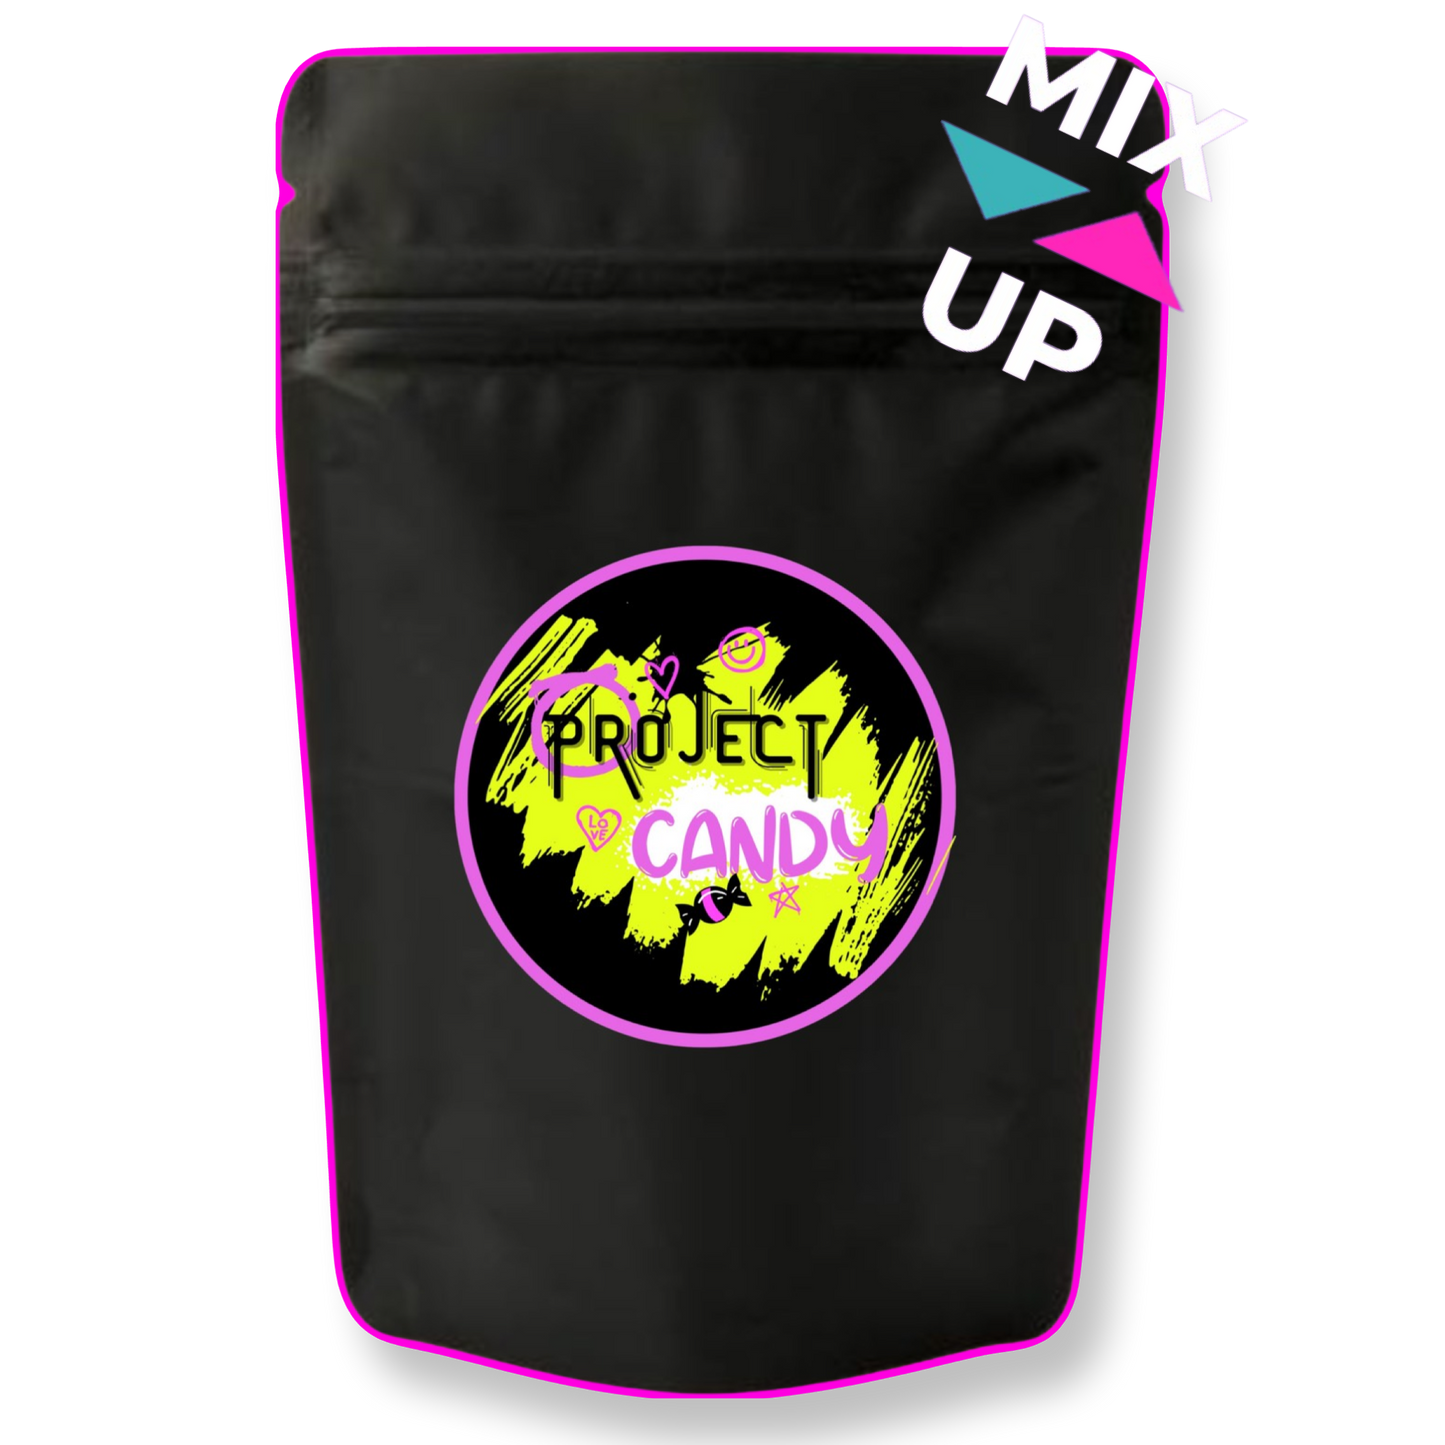 PROJECT MIX UP